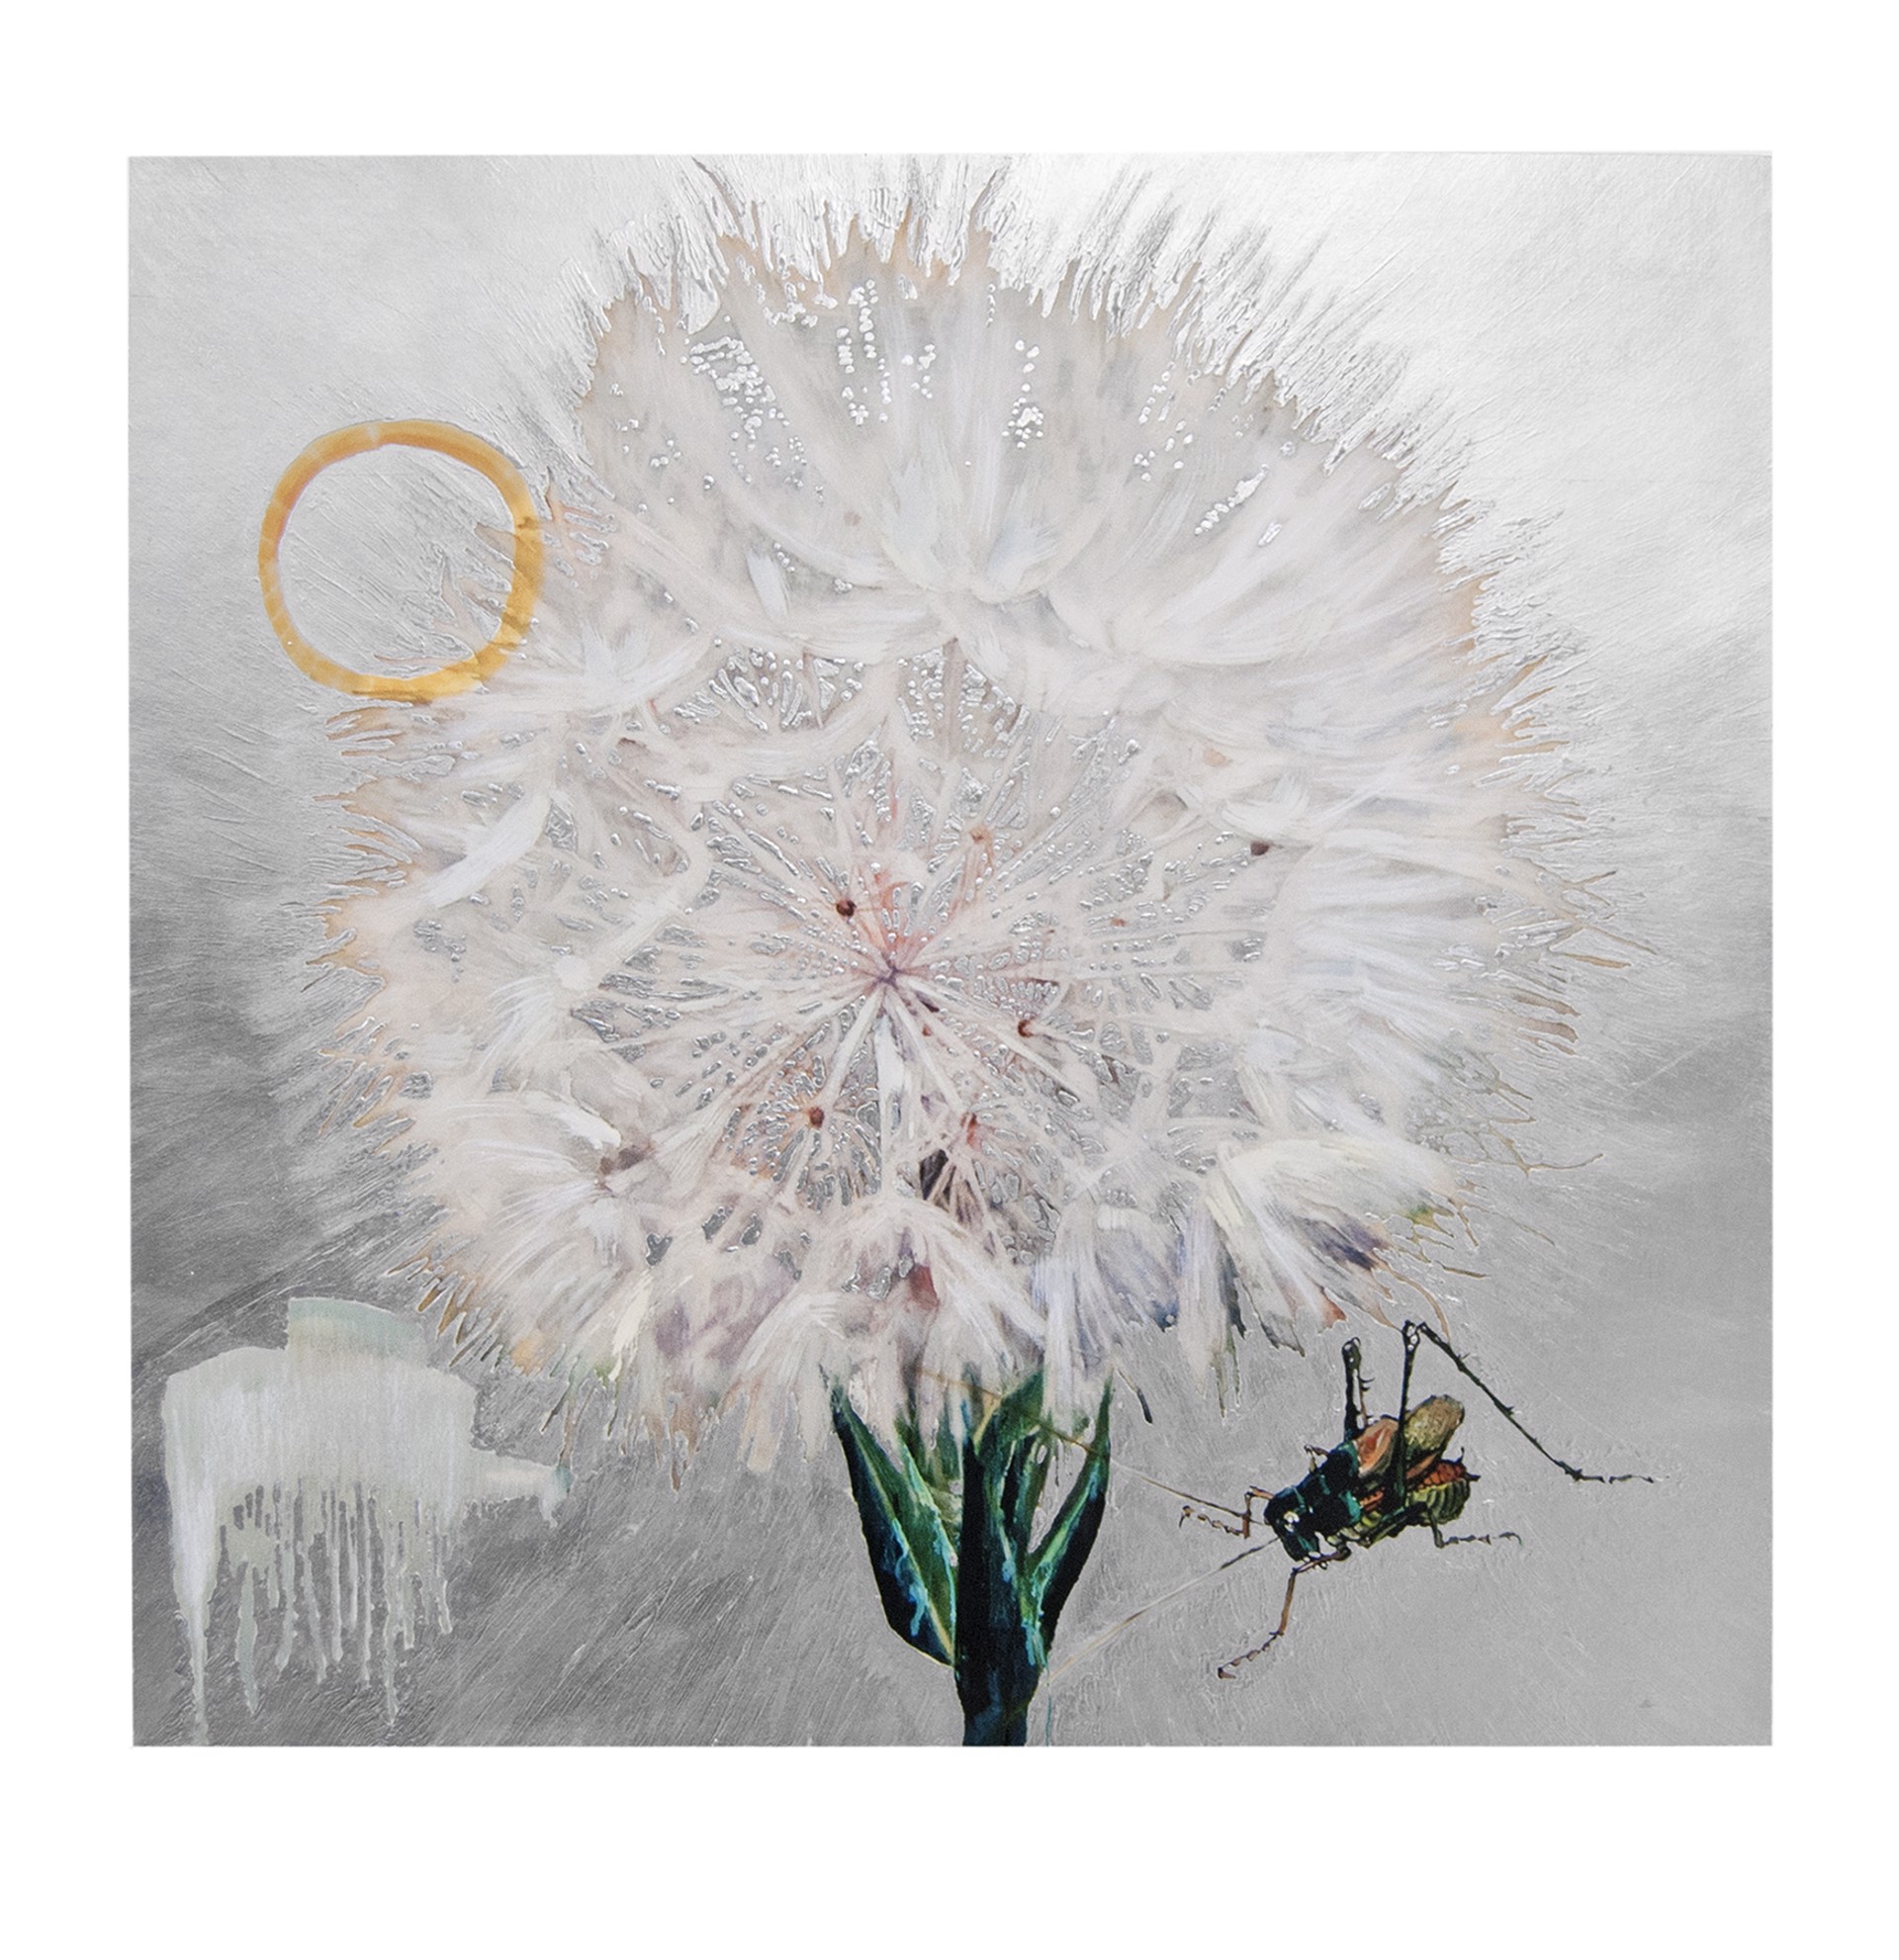 Dandelion with Cricket (Silver) 4/9 by Hung Liu